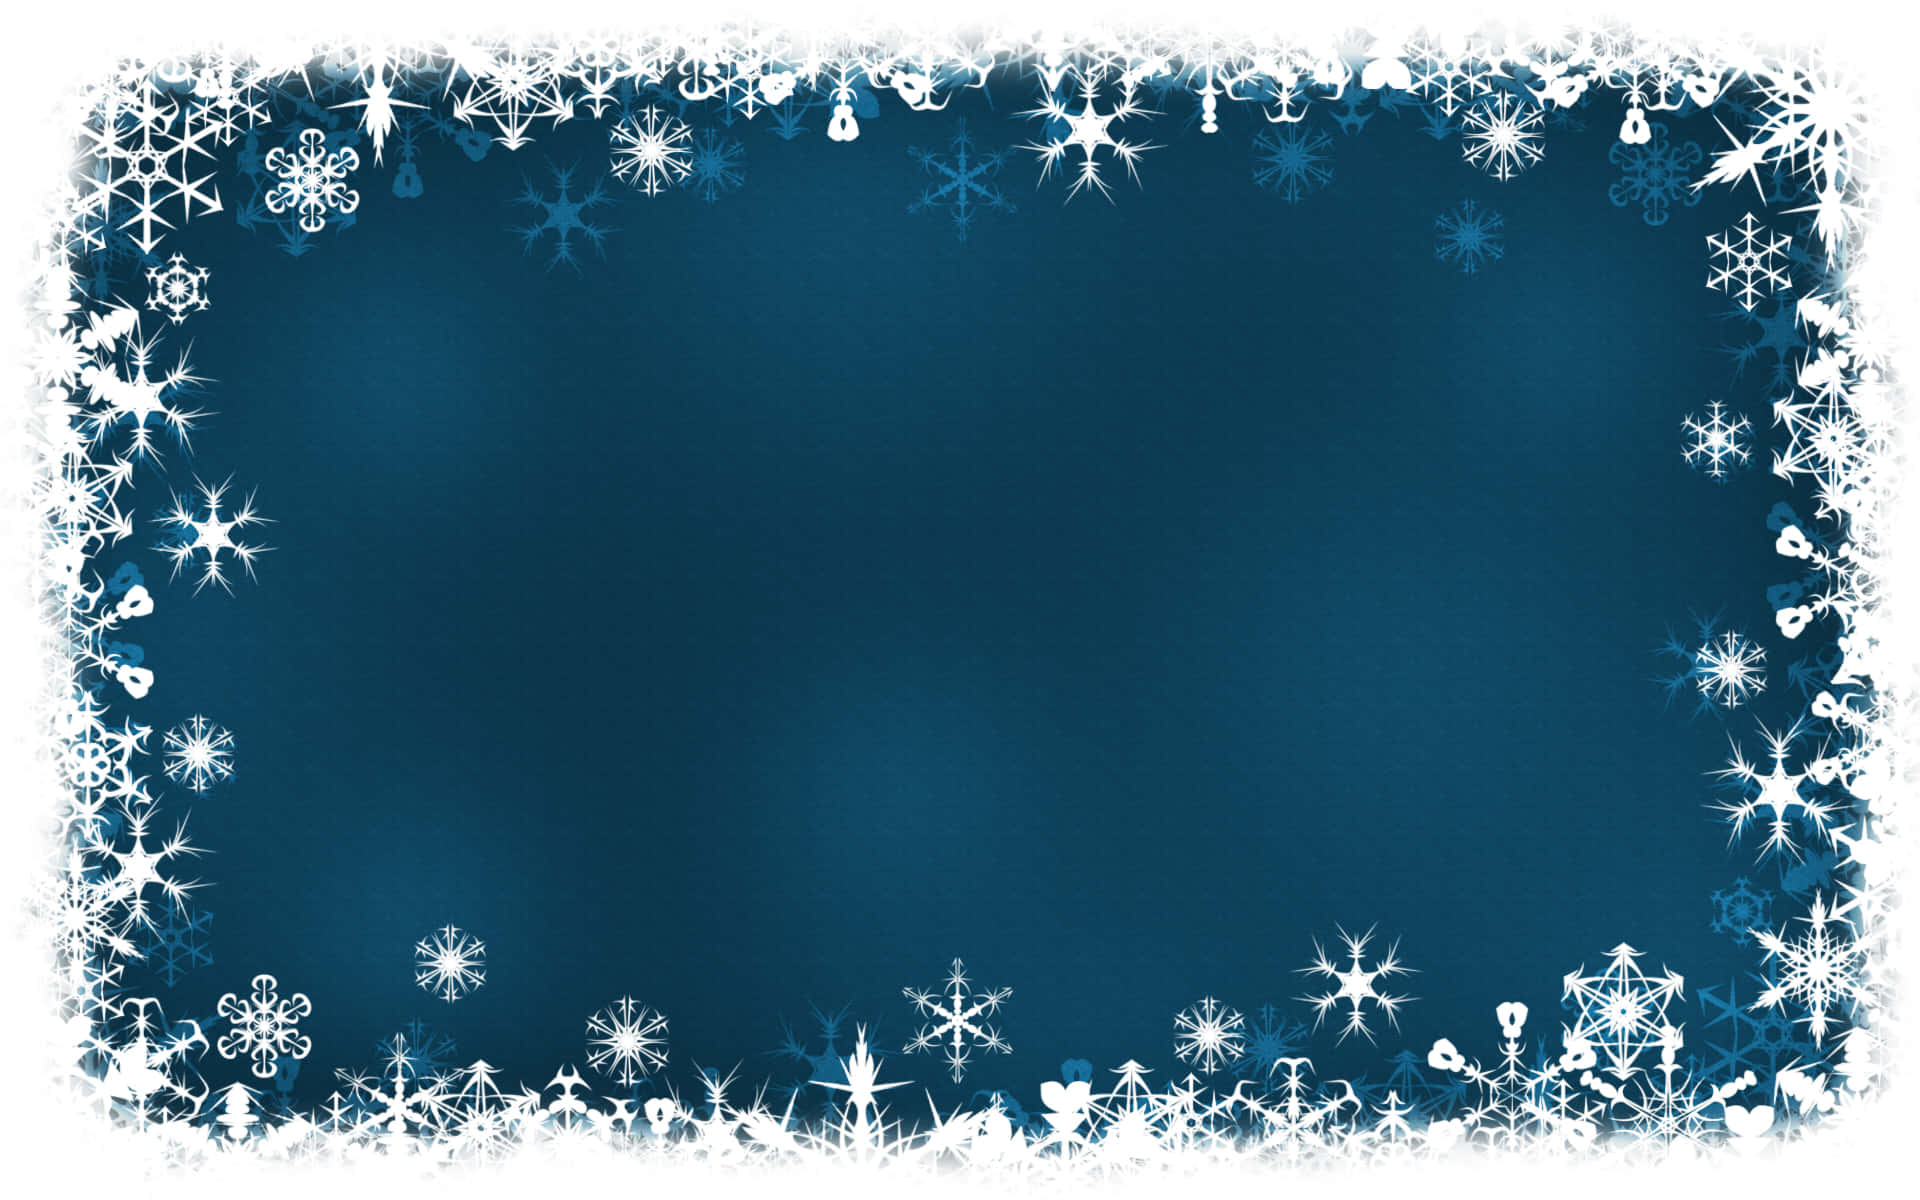 Celebrate the Christmas season with a beautiful high resolution background